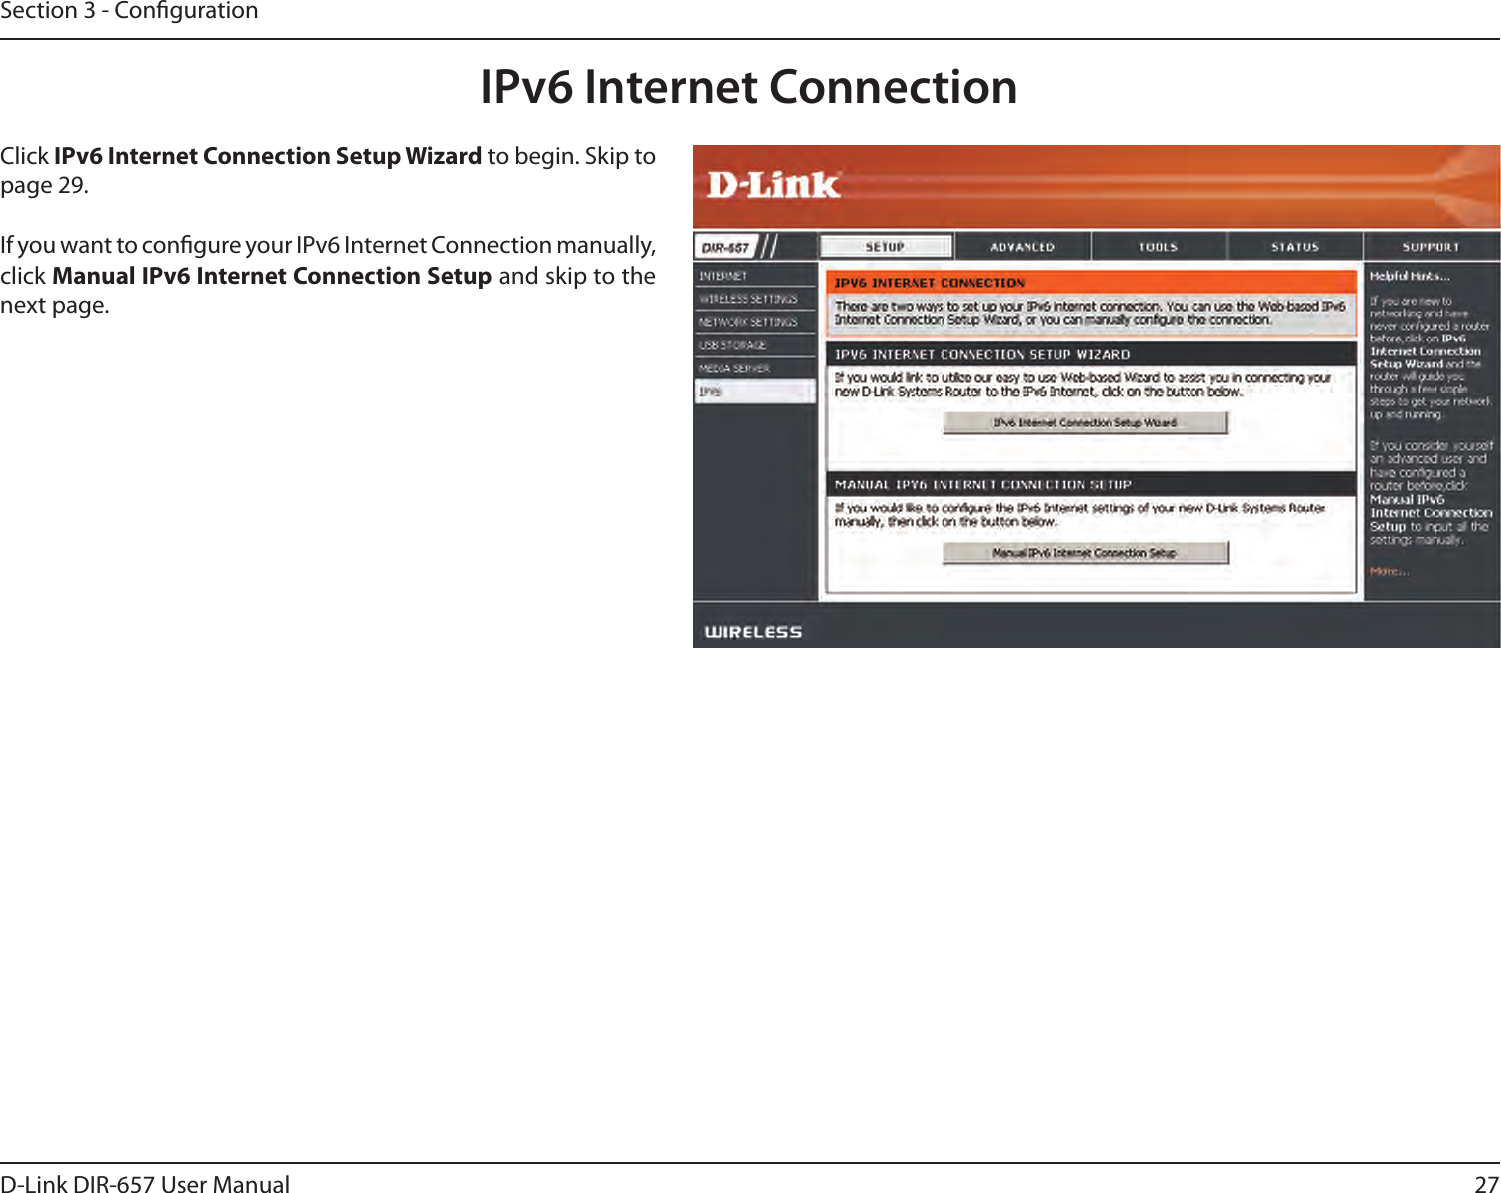 27D-Link DIR-657 User ManualSection 3 - CongurationIPv6 Internet ConnectionClick IPv6 Internet Connection Setup Wizard to begin. Skip to page 29.If you want to congure your IPv6 Internet Connection manually, click Manual IPv6 Internet Connection Setup and skip to the next page.